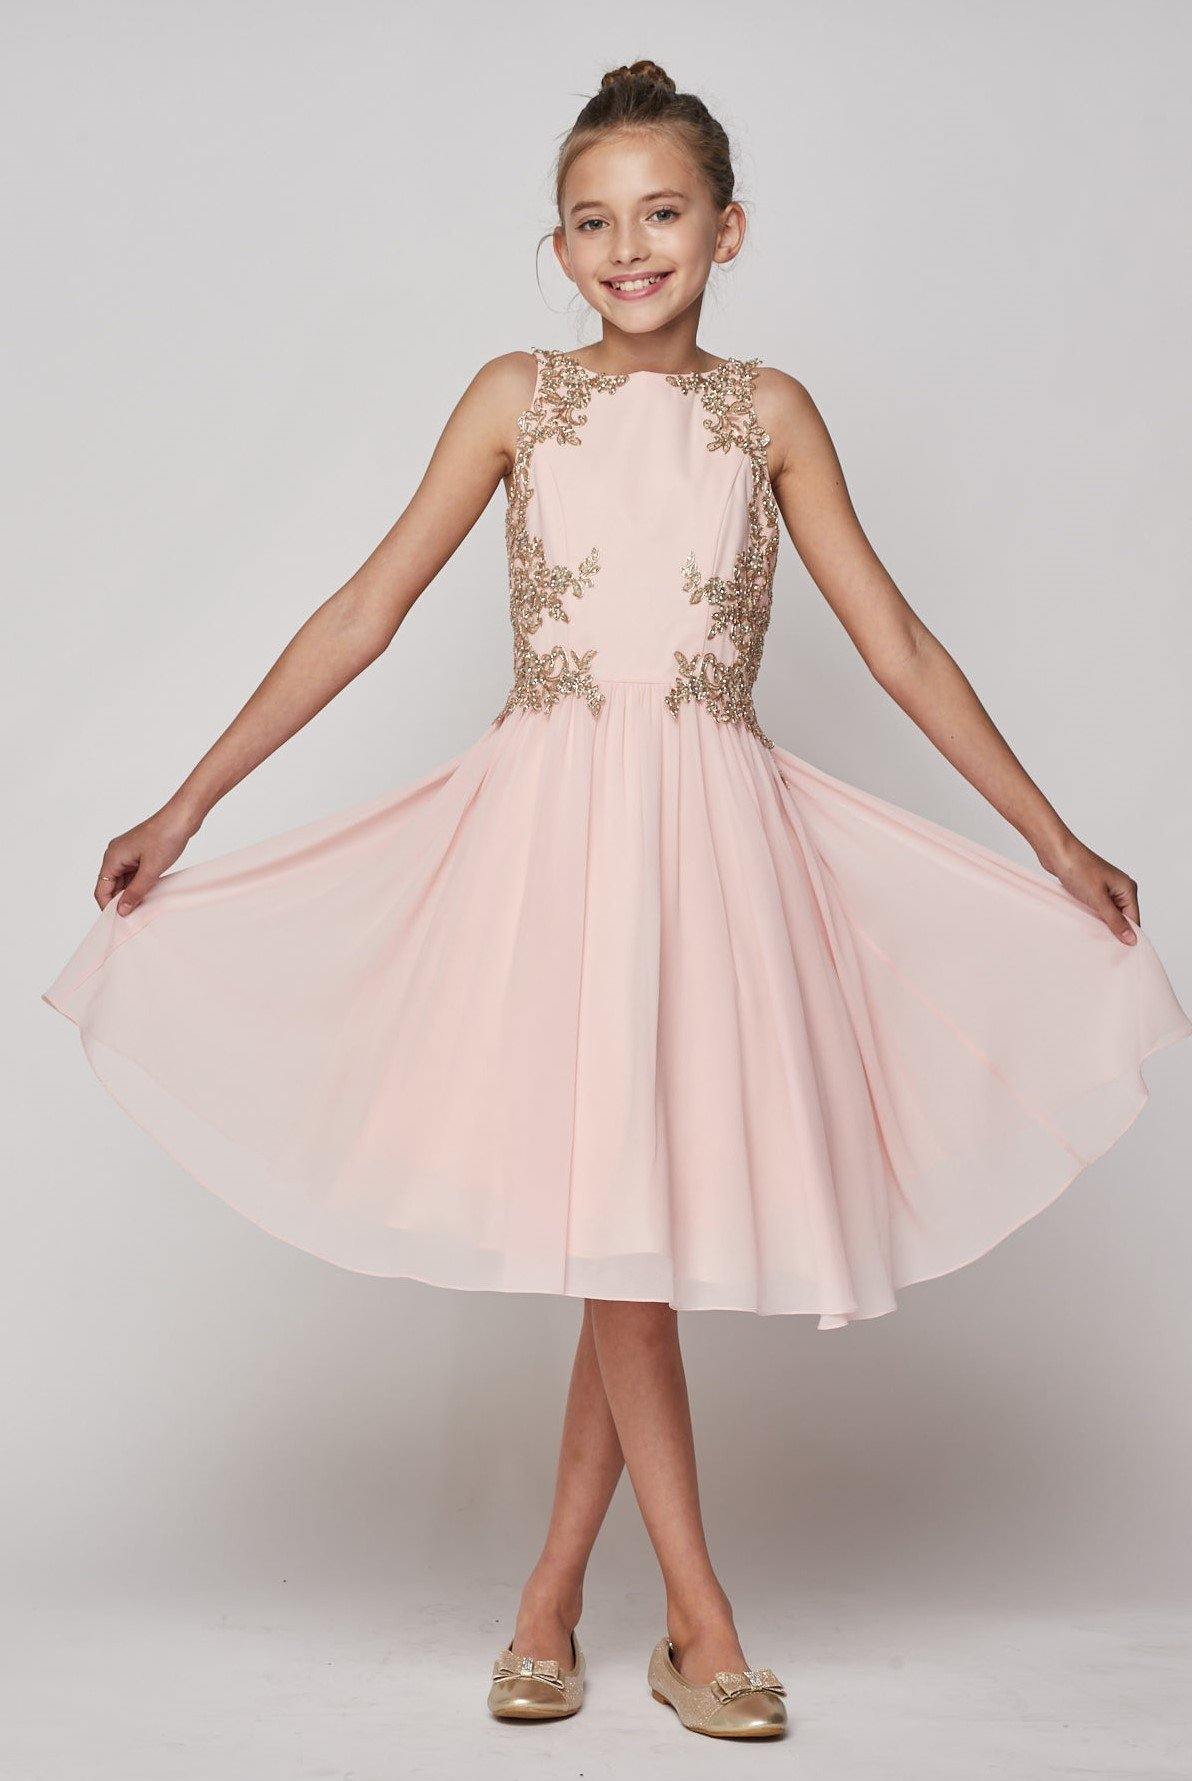 Beaded Sequin Short Dress Flower Girl - The Dress Outlet Cinderella Couture